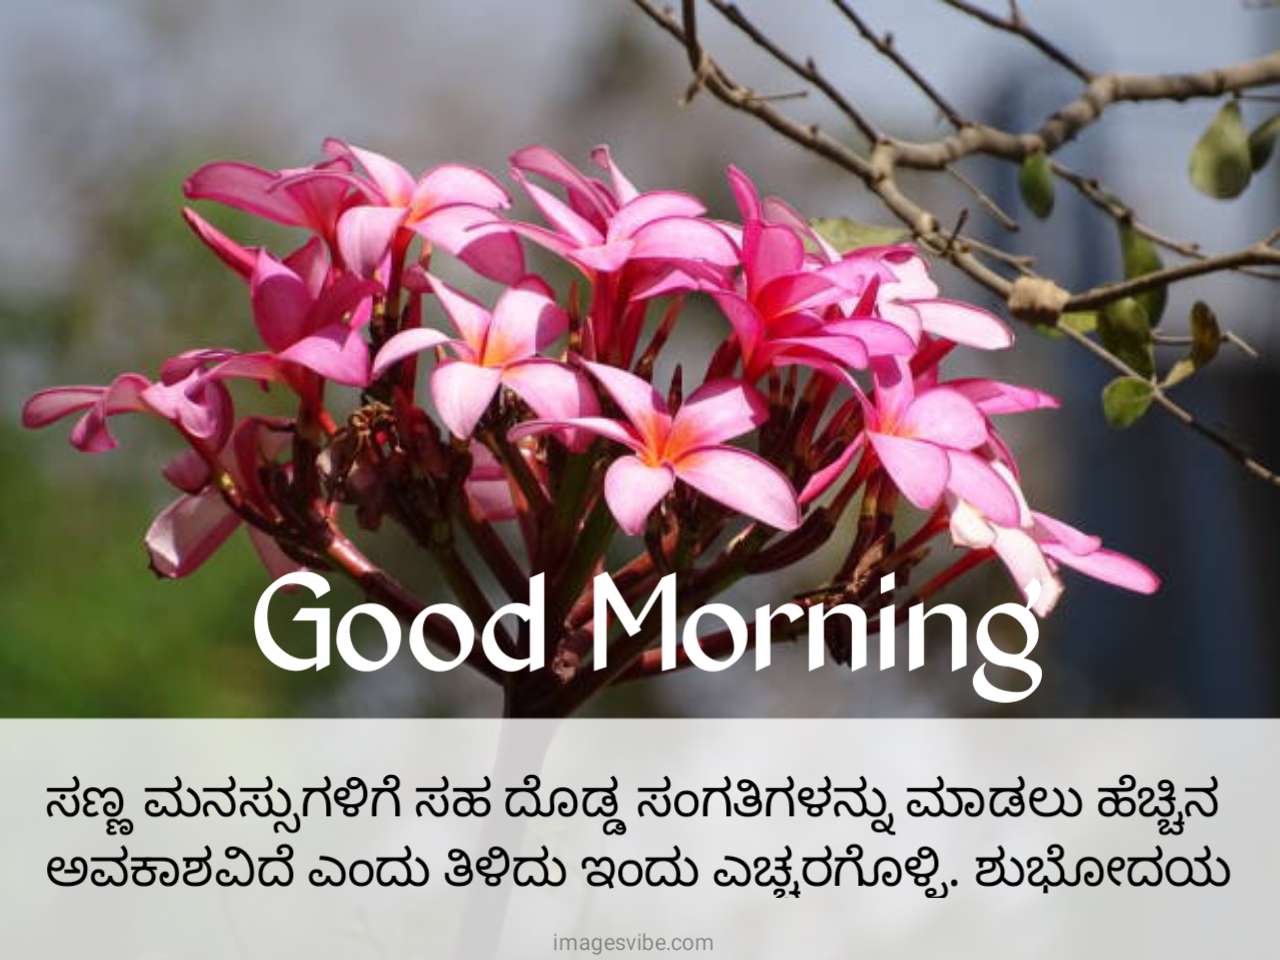 Beautiful Good Morning Kannada Images & Quotes in 2023 - Images Vibe